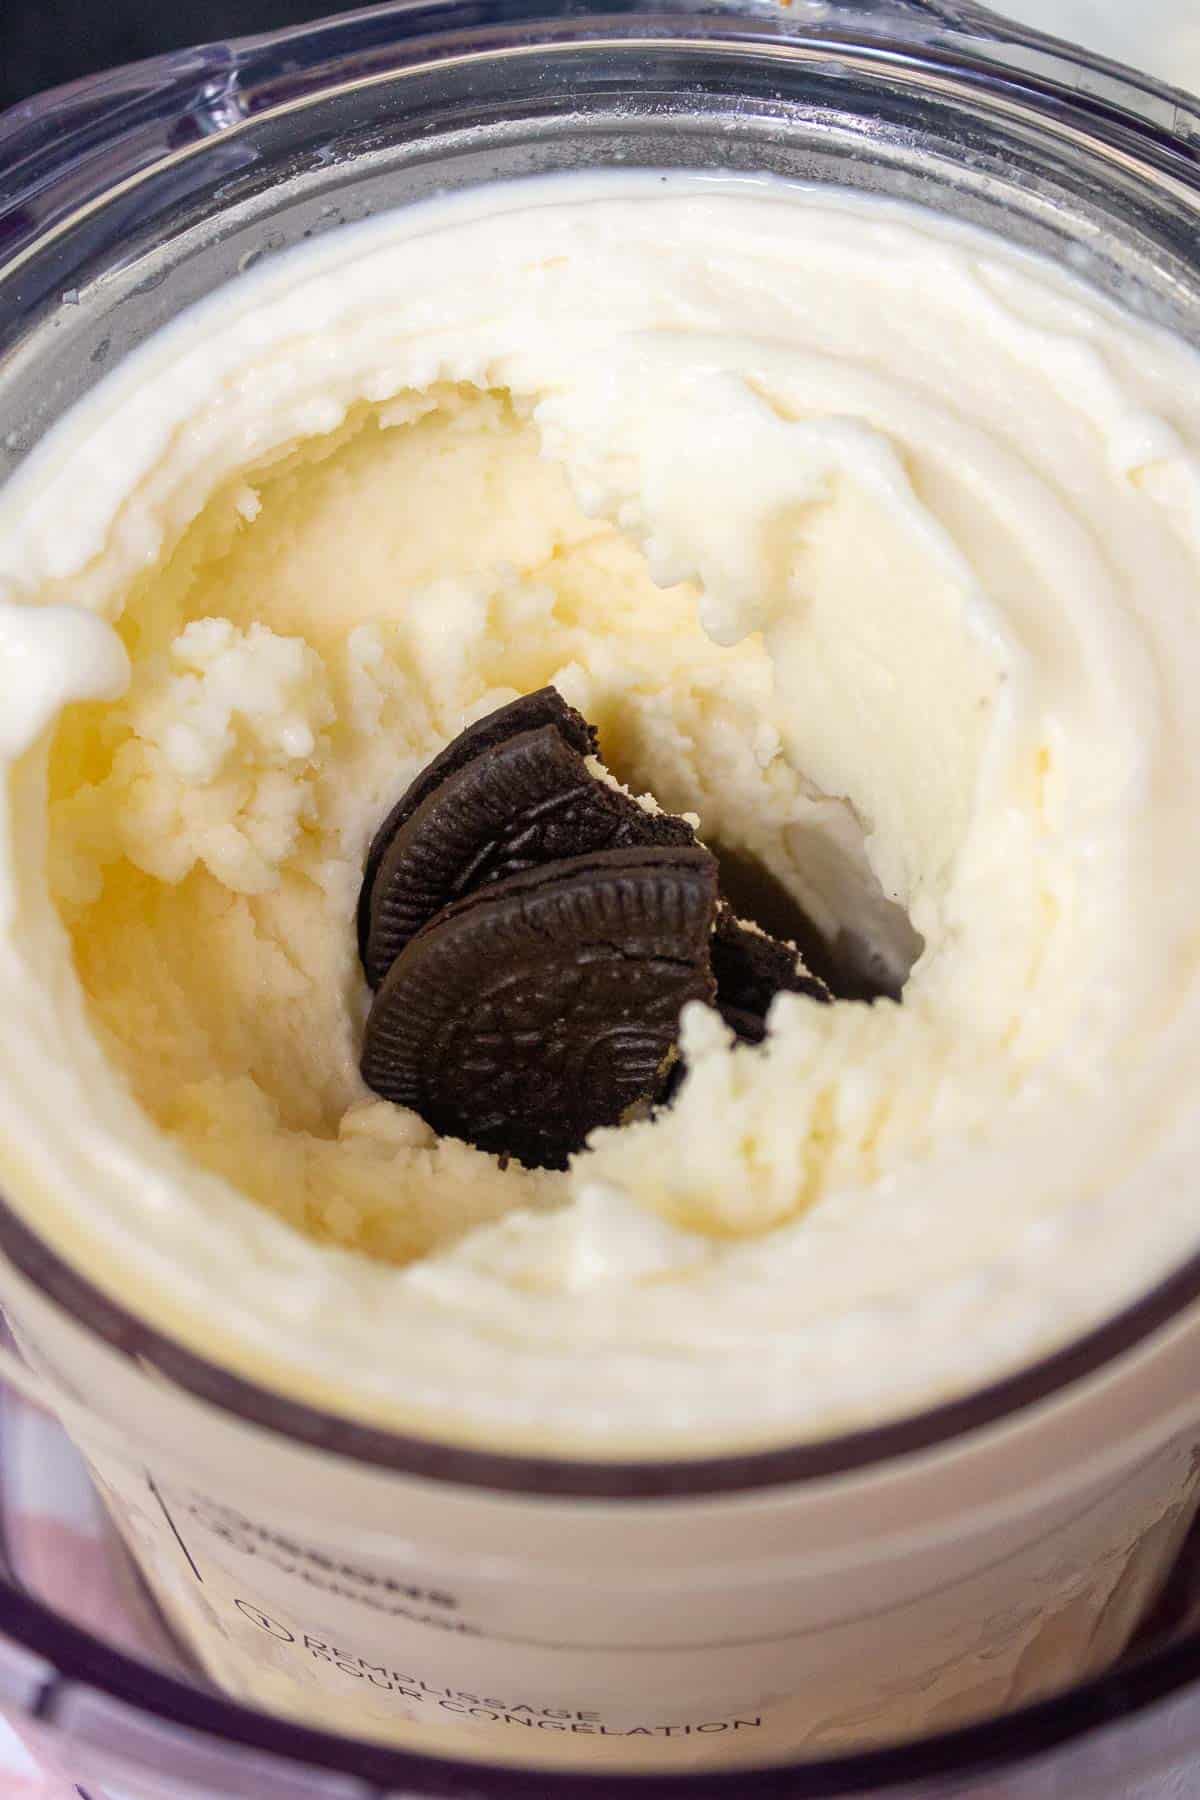 Oreo halves are placed into the hole in the center of the ice cream